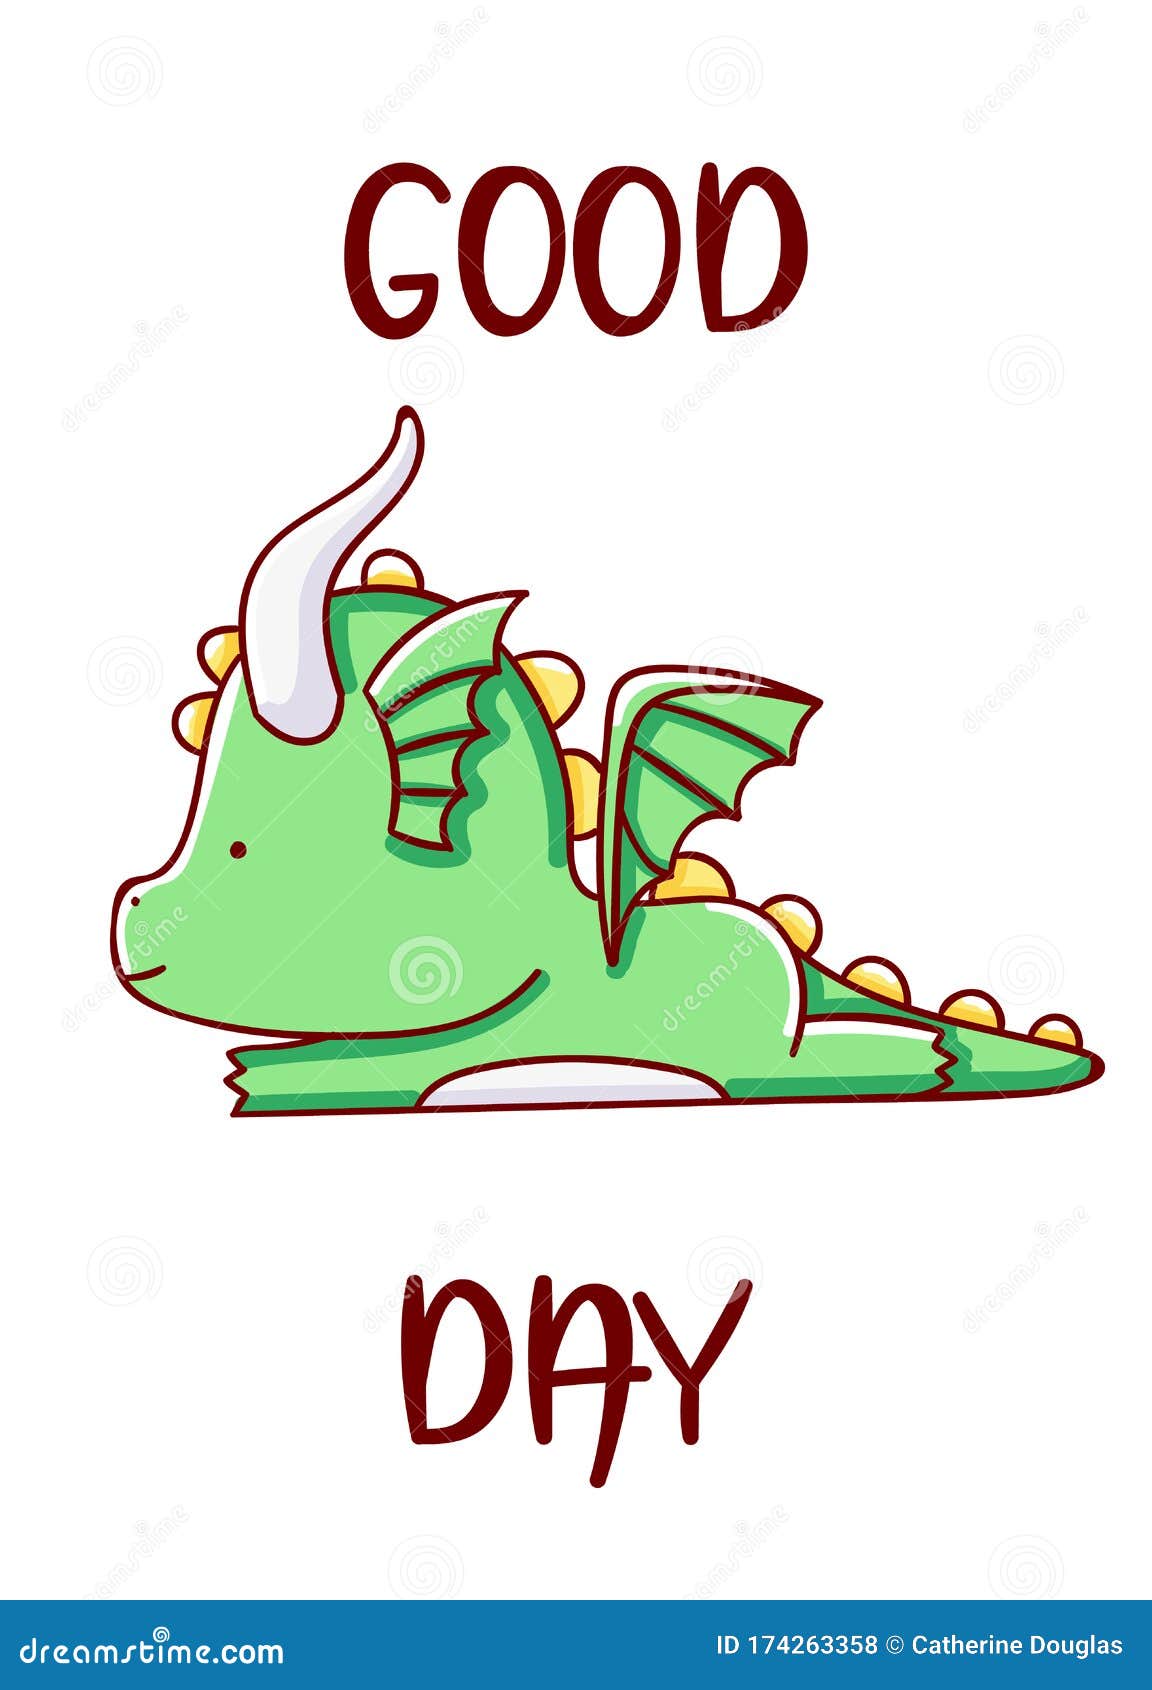 Character Kawaii Dragon Cartoon Cute Good Day Hand Drawn Isolated on White  Background Stock Vector - Illustration of futuristic, children: 174263358